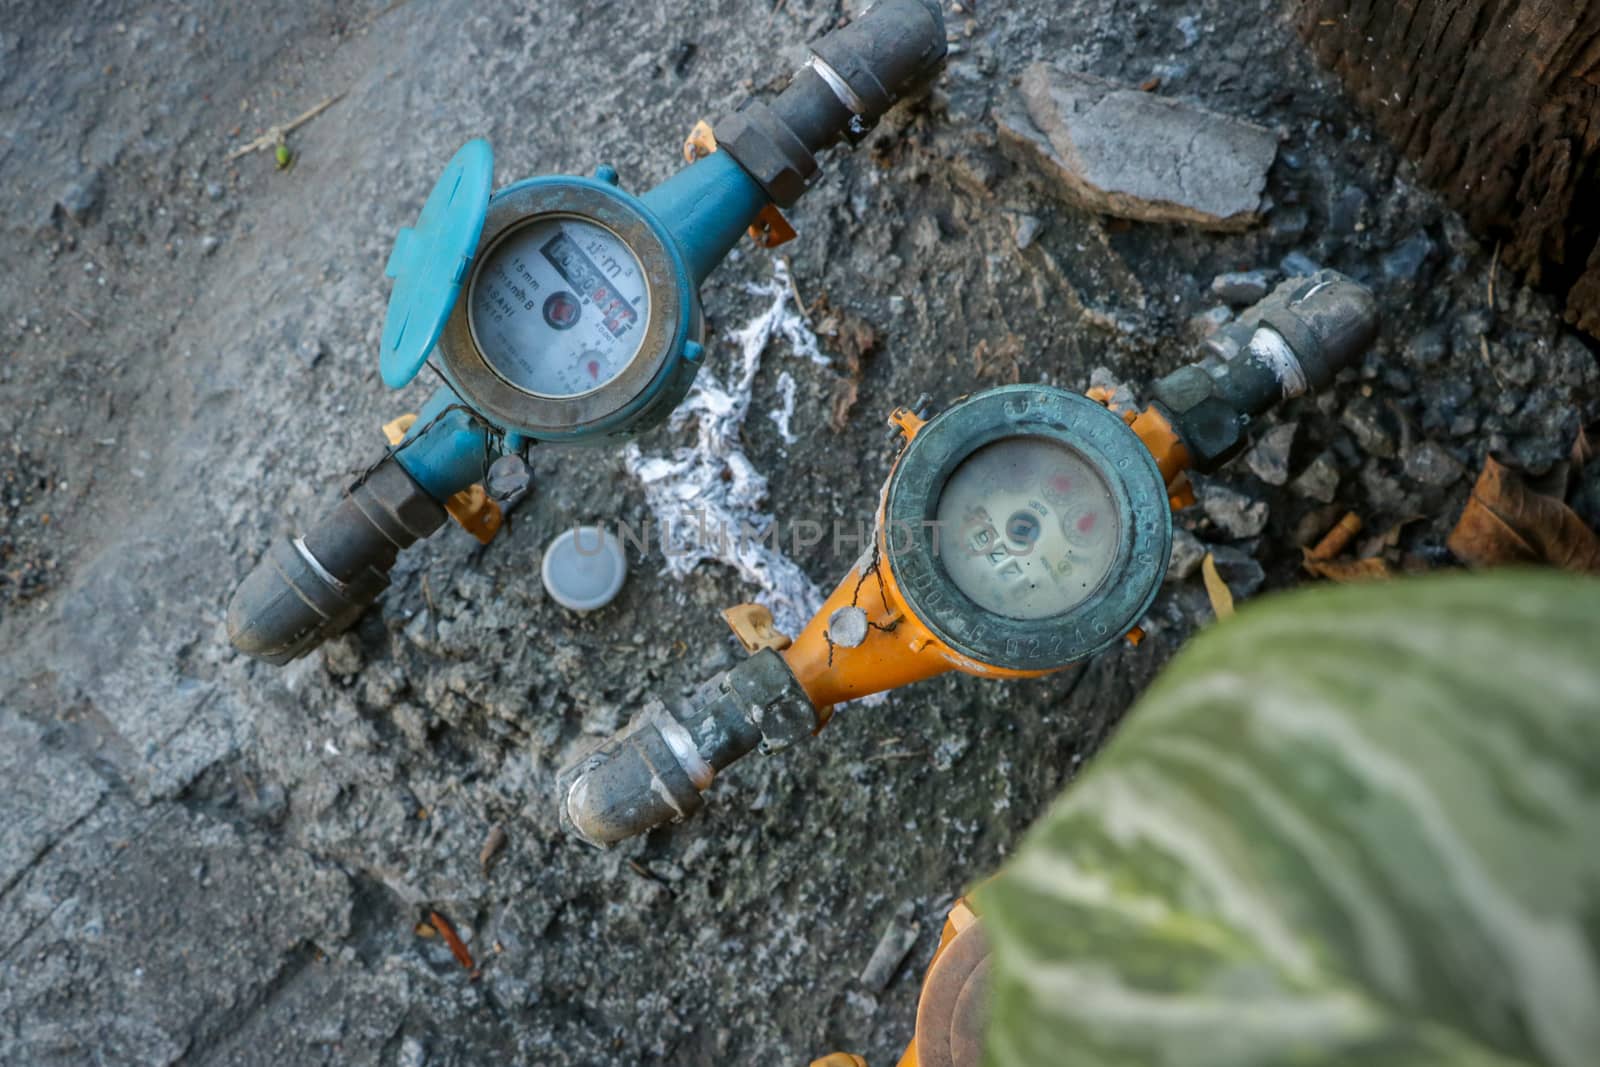 Vintage Orange and Blue Water Meters on Dirty Concrete/ Stone Texture in the Garden with Green Leaves in Foreground. Street Photography Bangkok Thailand.